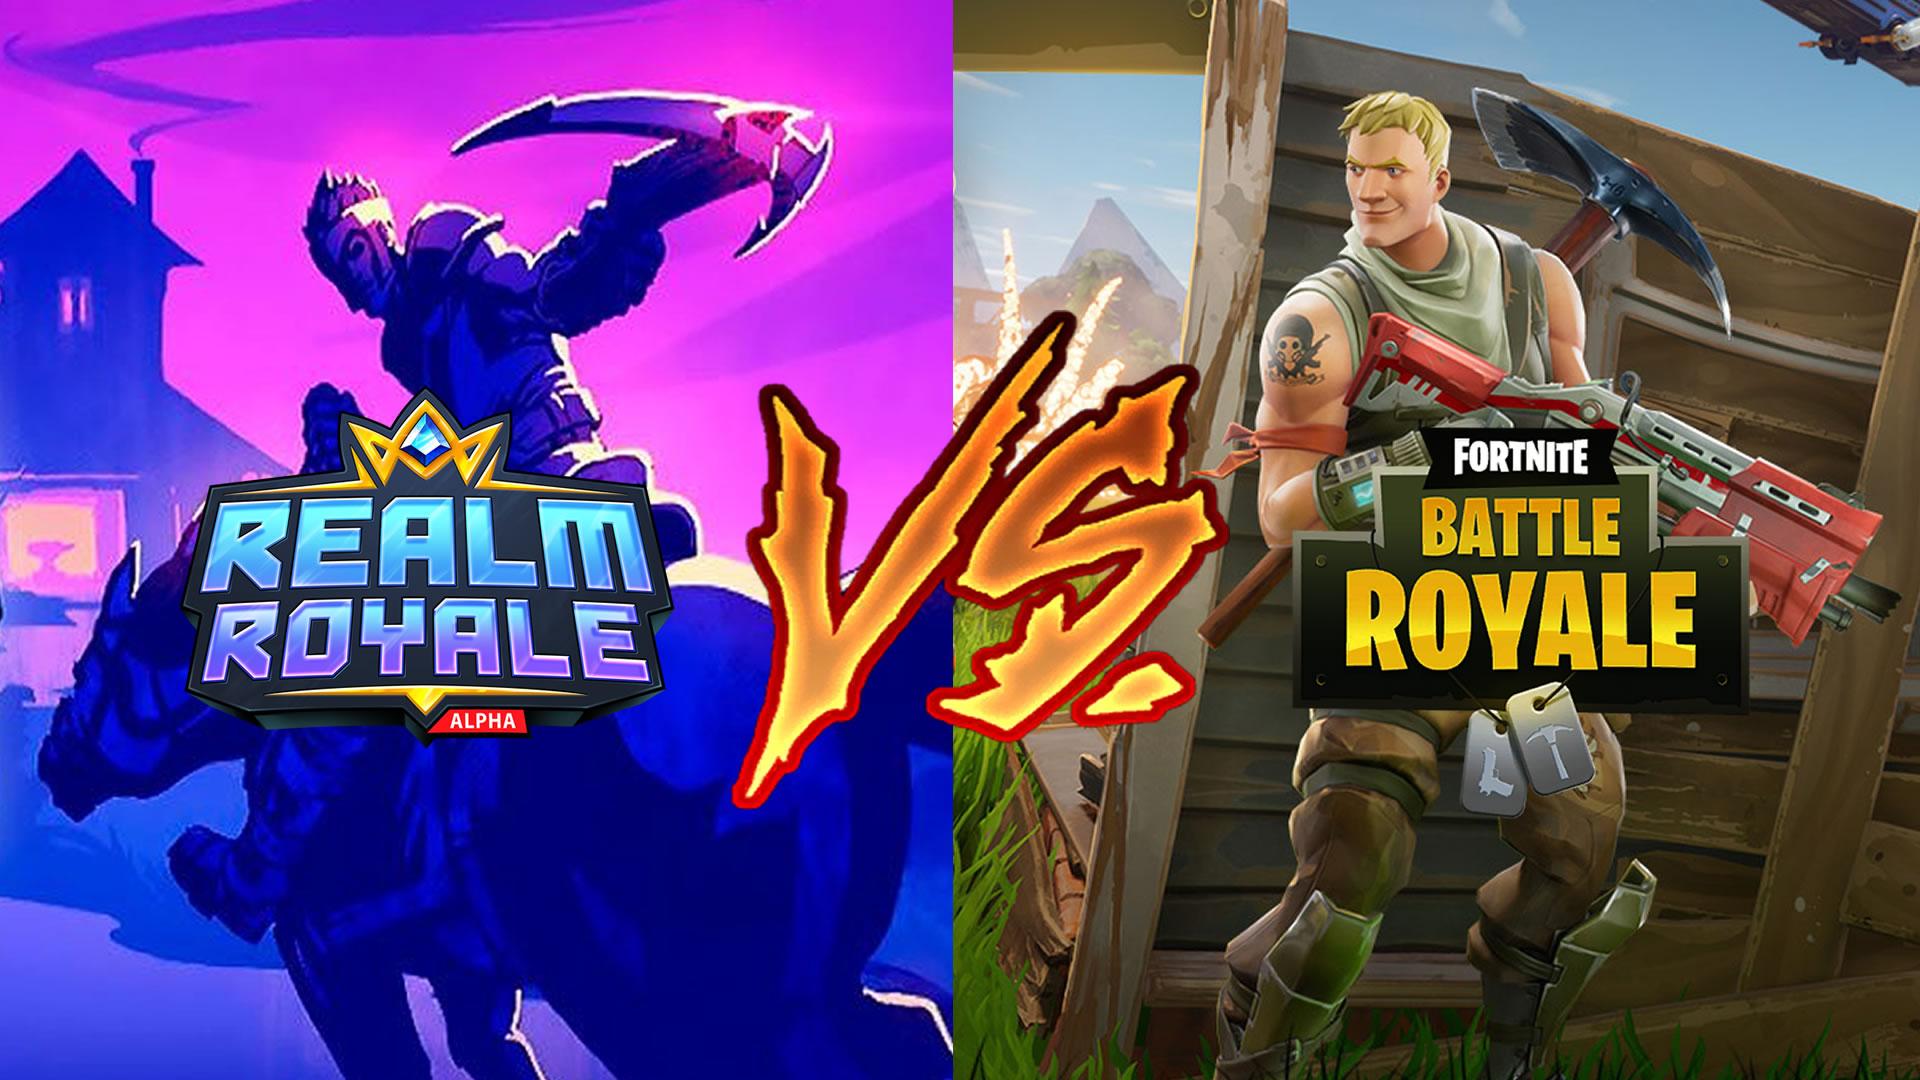 Realm Royale vs. Fortnite: How are they different?